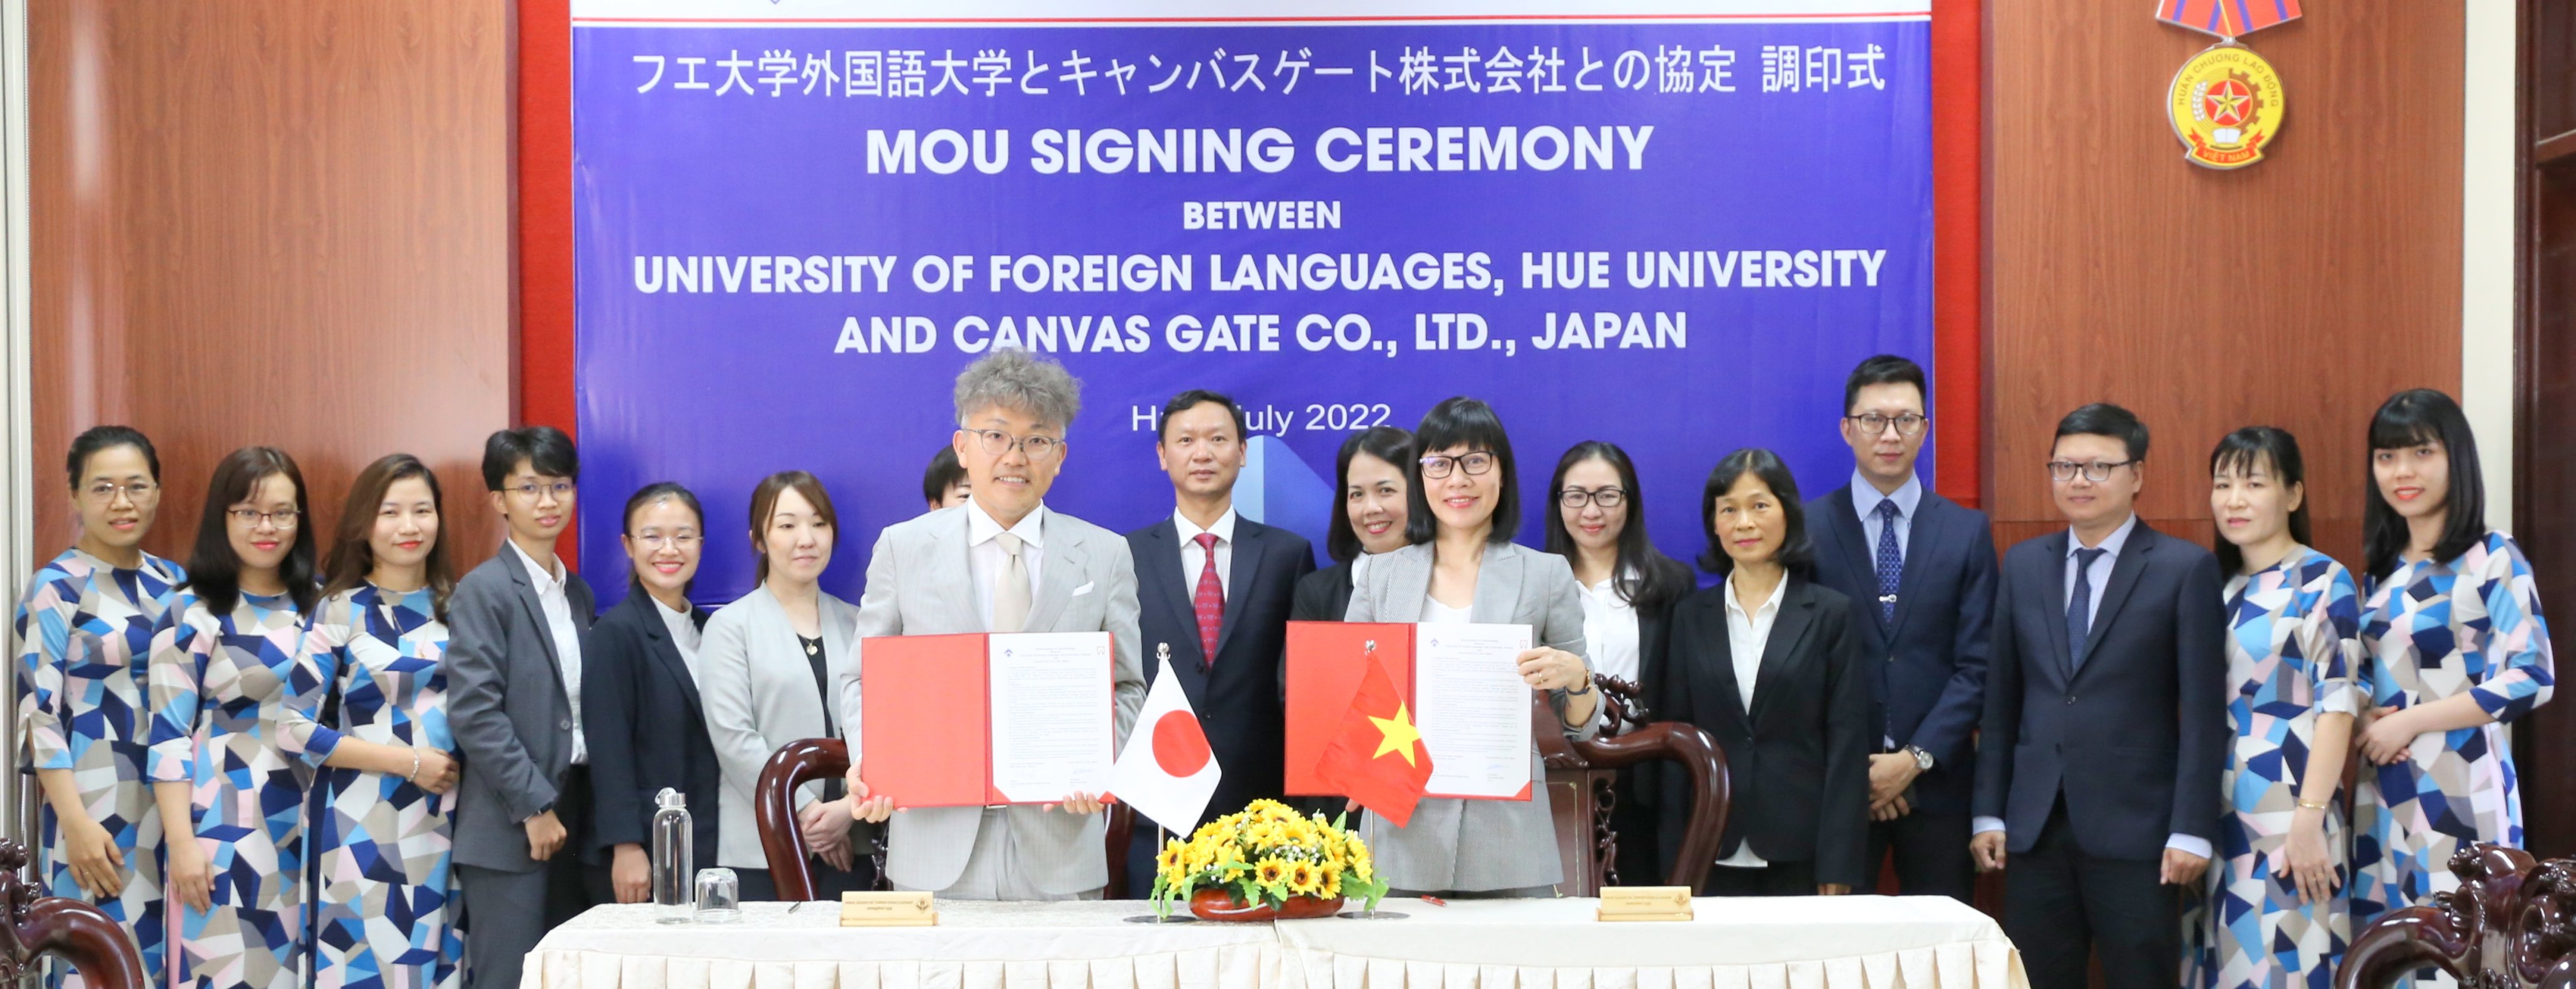 MoU Signing Ceremony between HUFLIS and Canvas Gate Co., Lt., Japan